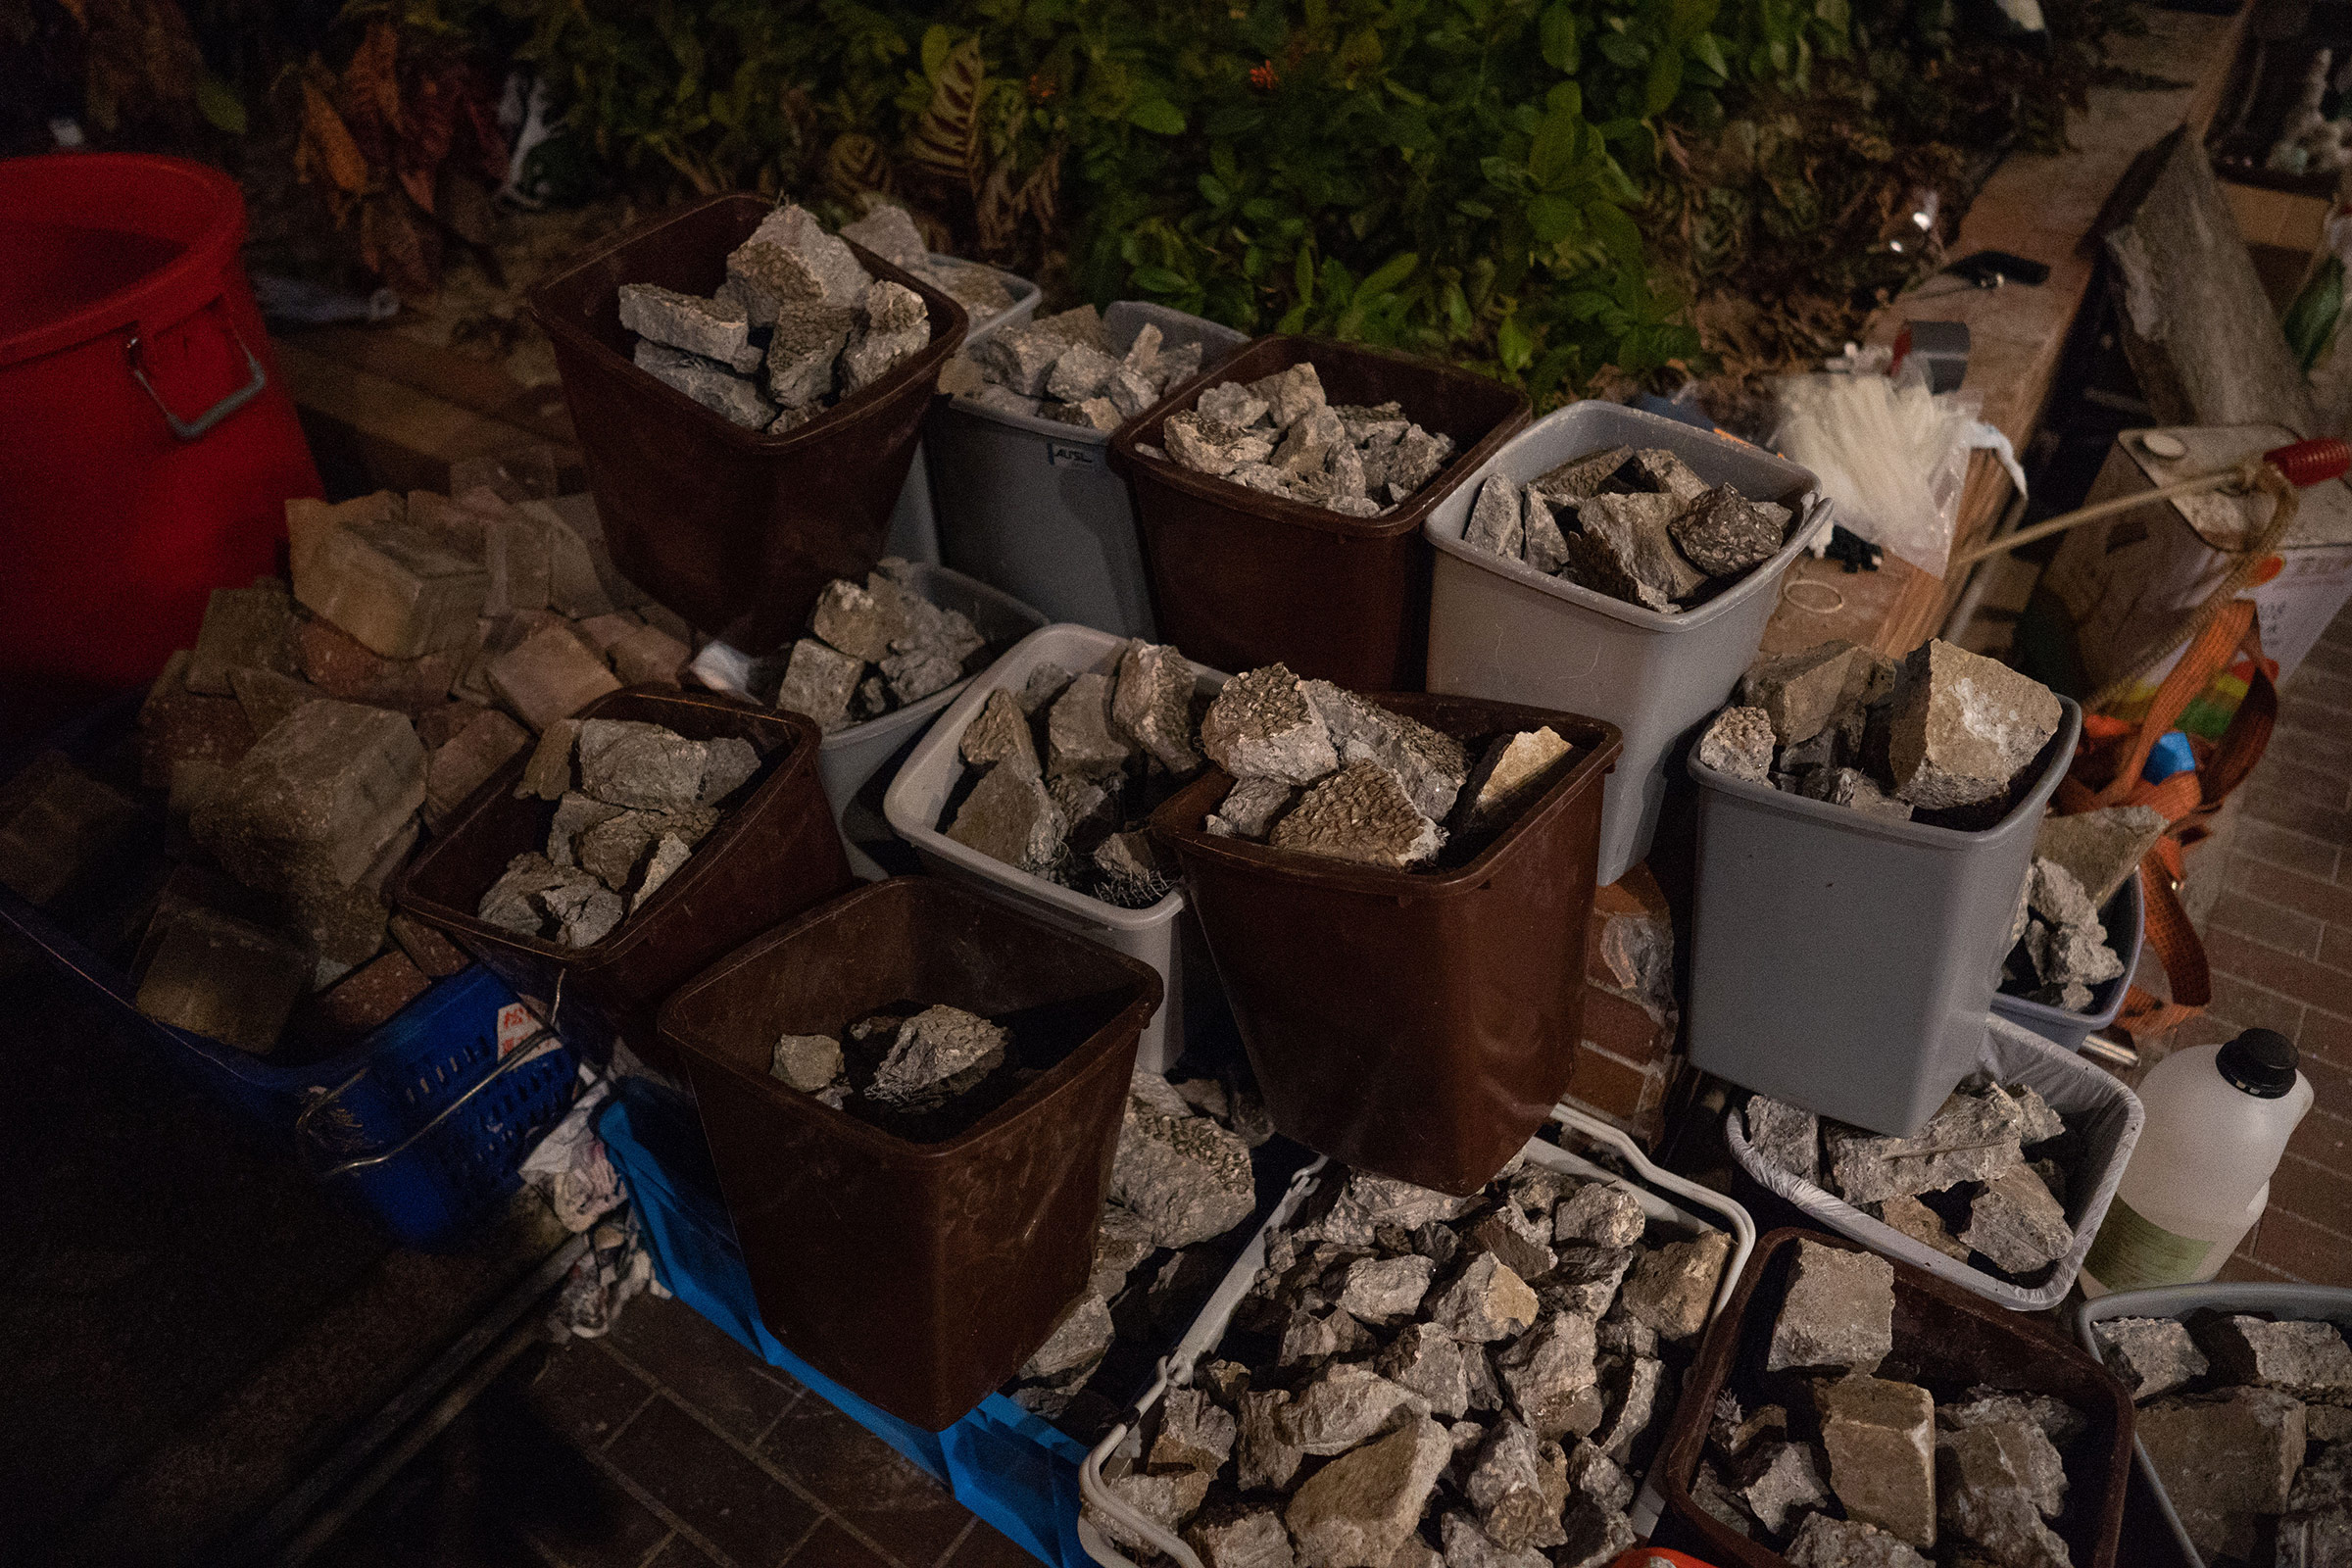 Bricks, used both to slow down advancing police as well as projectiles, are neatly sorted into garbage bins at PolyU.